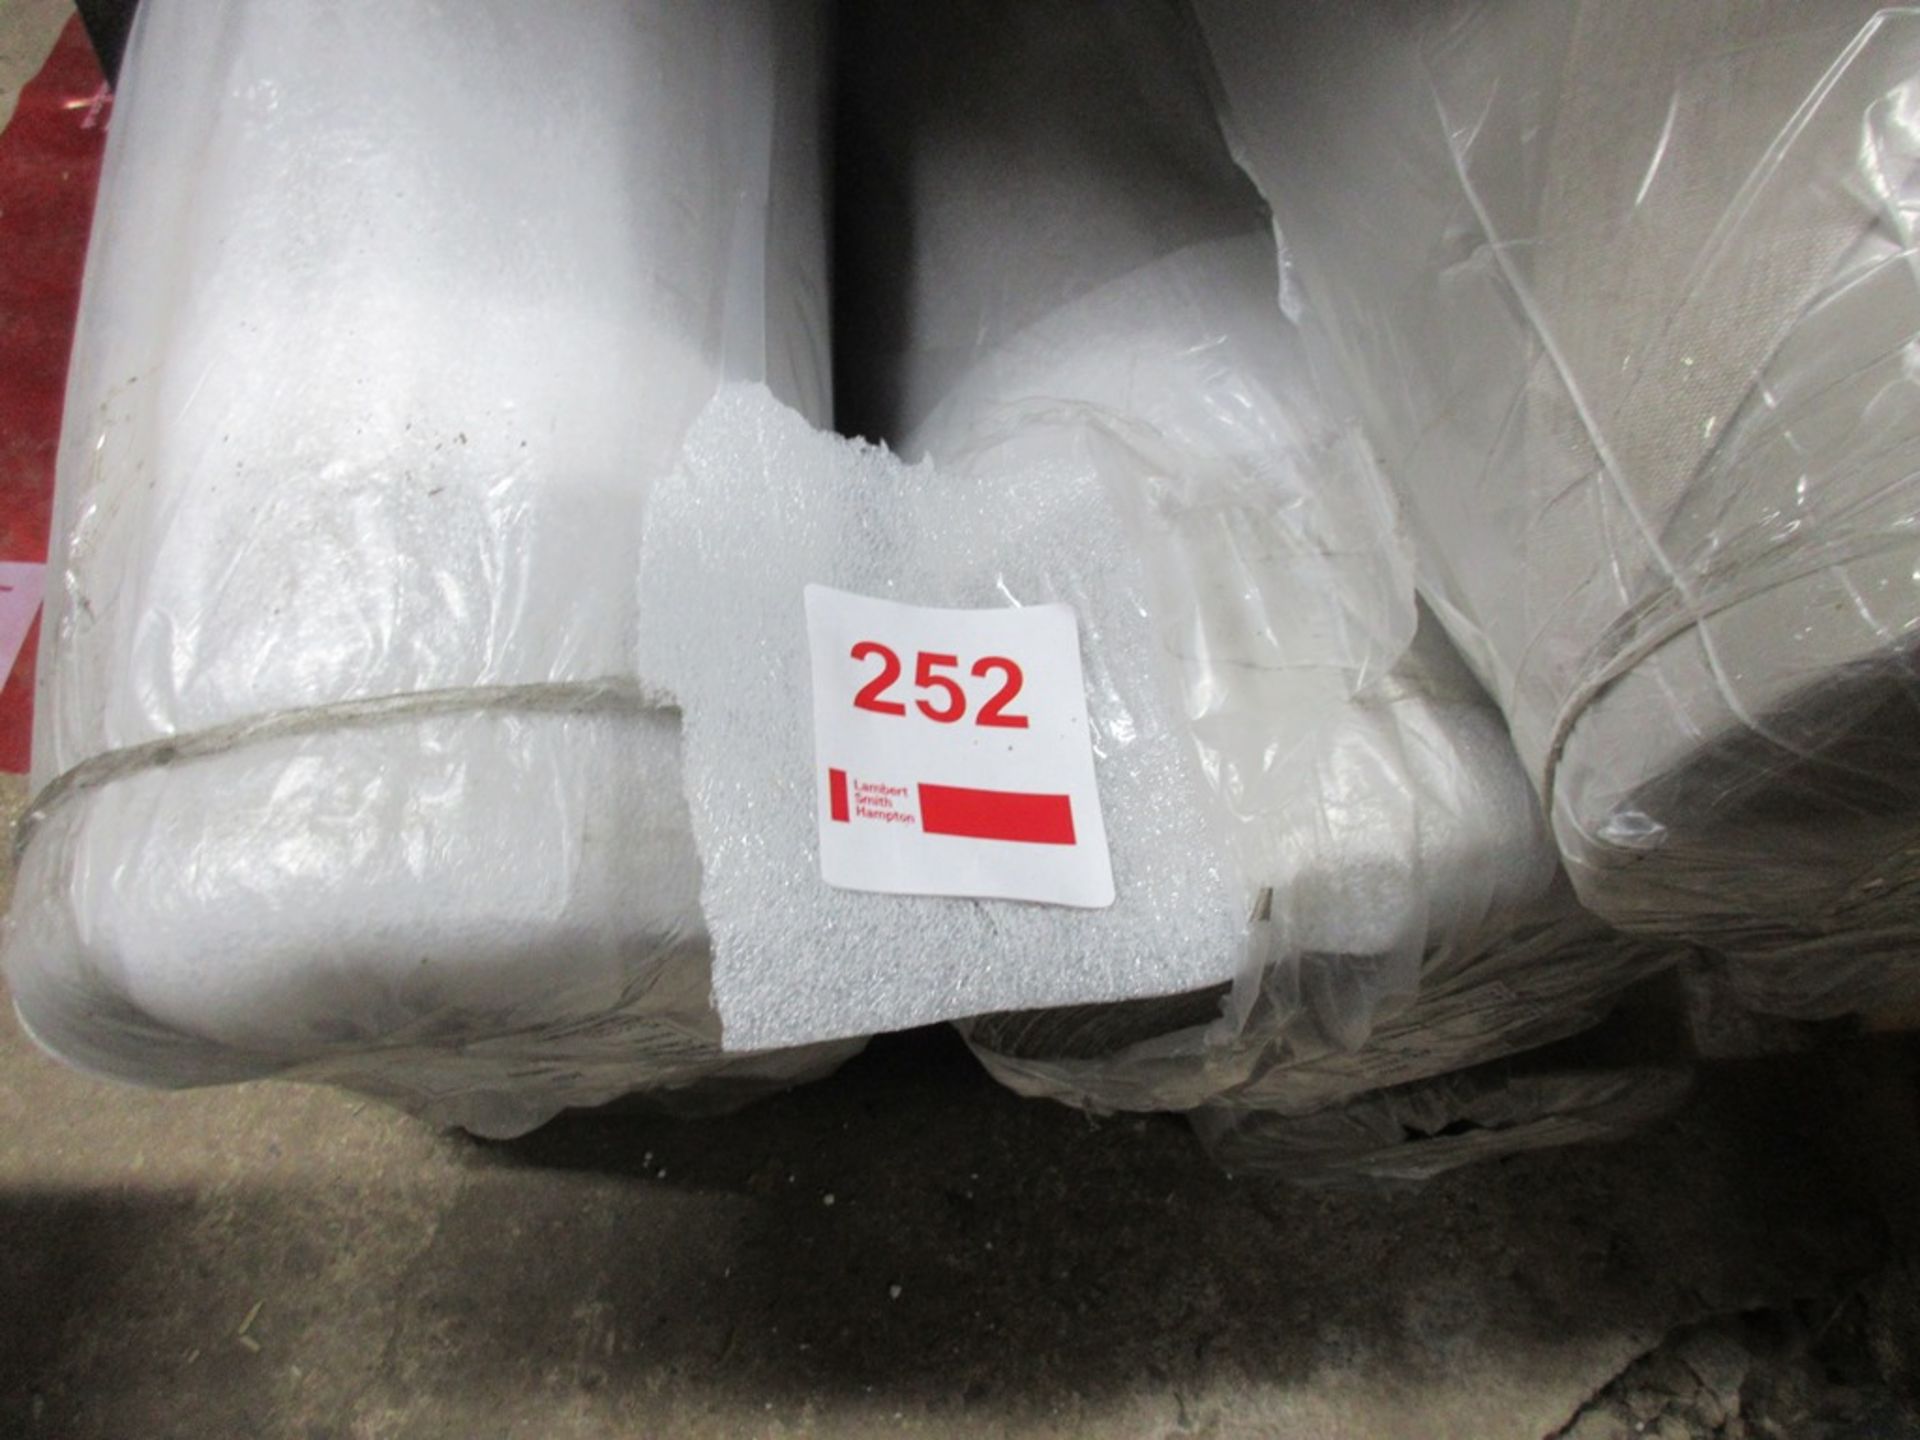 3 x rolls of various length blackout material, colour ref: 08A and 08B, product REVIII08280, width